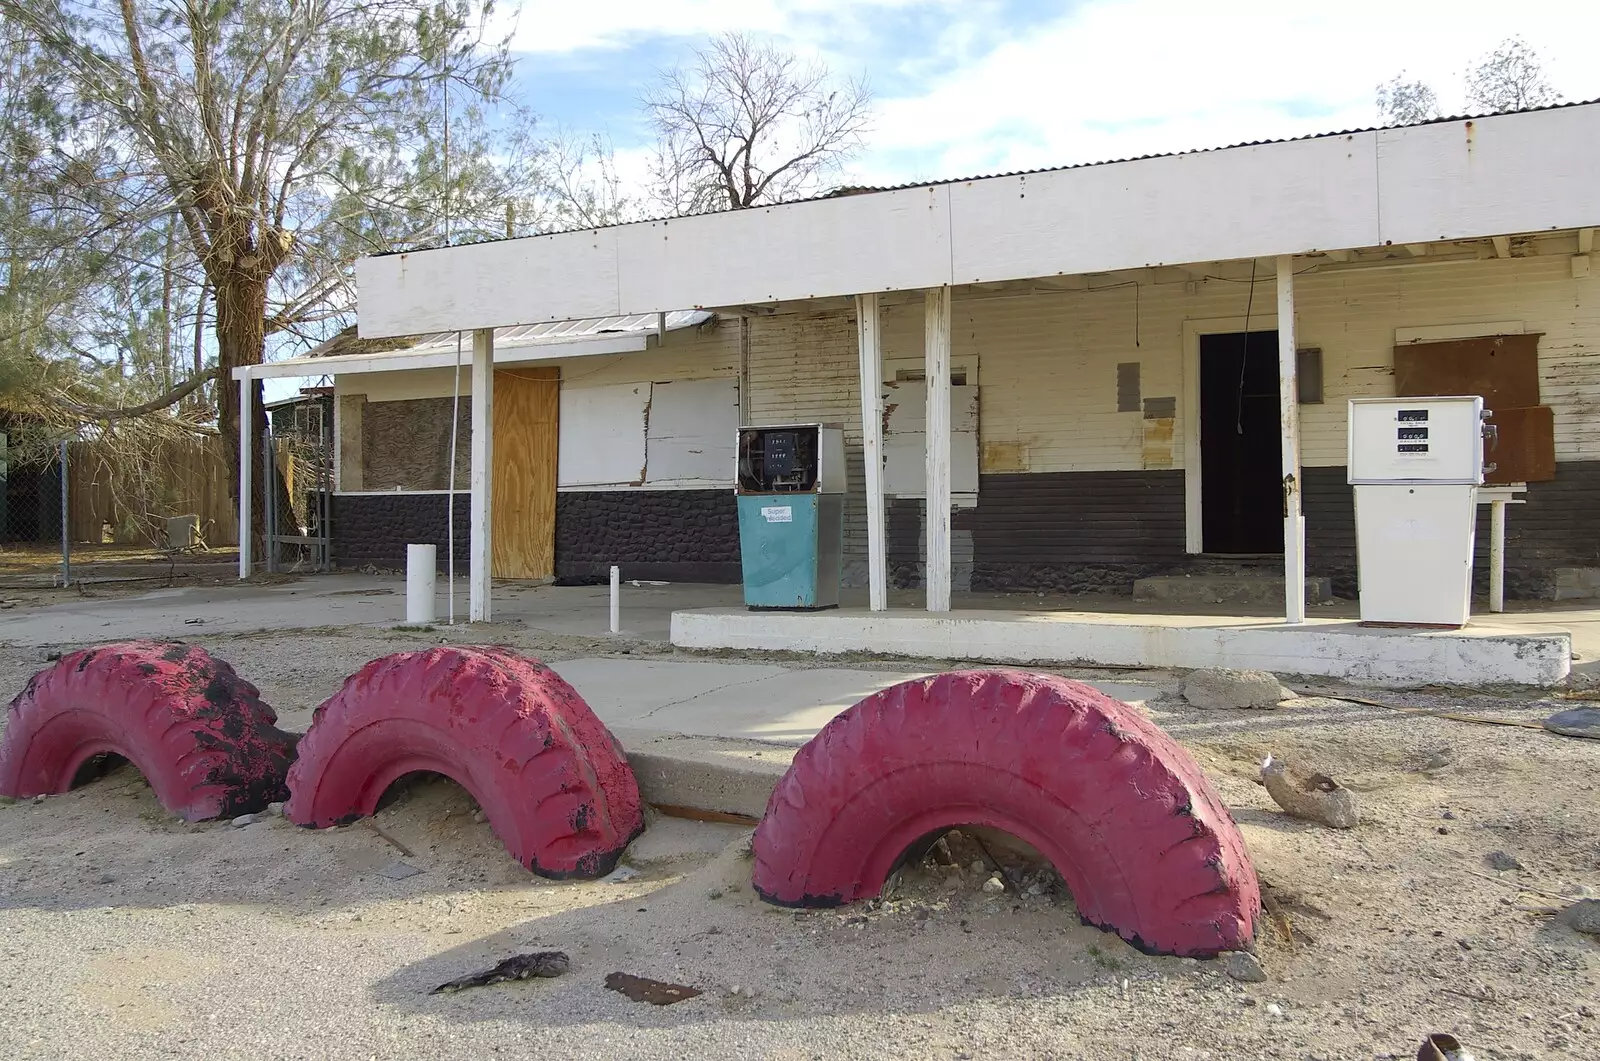 A derelict petrol station near Ocotillo Wells, from The End of the World: Julian to the Salton Sea and Back, California, US - 1st March 2008